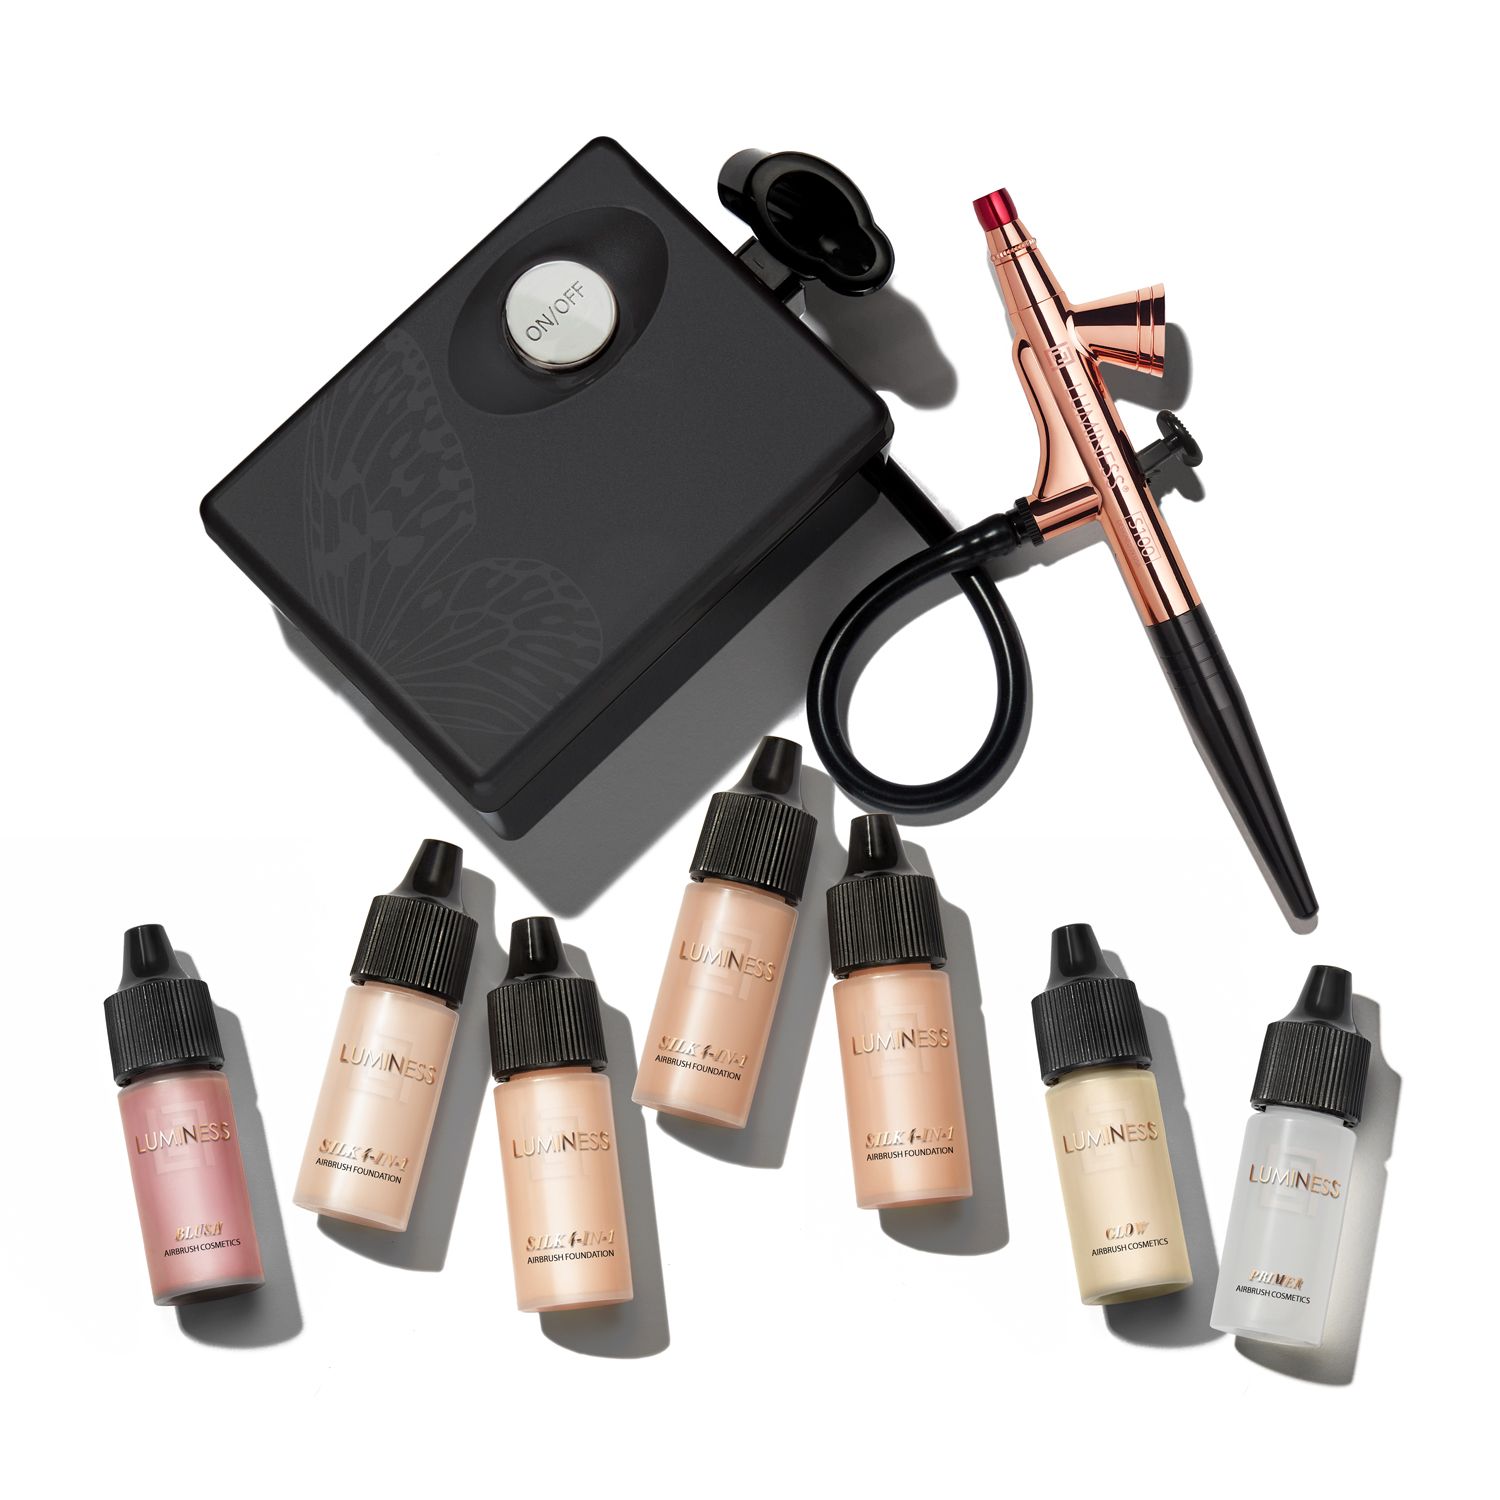 Luminess Air brush makeup for a flawless face (+ Giveaway)